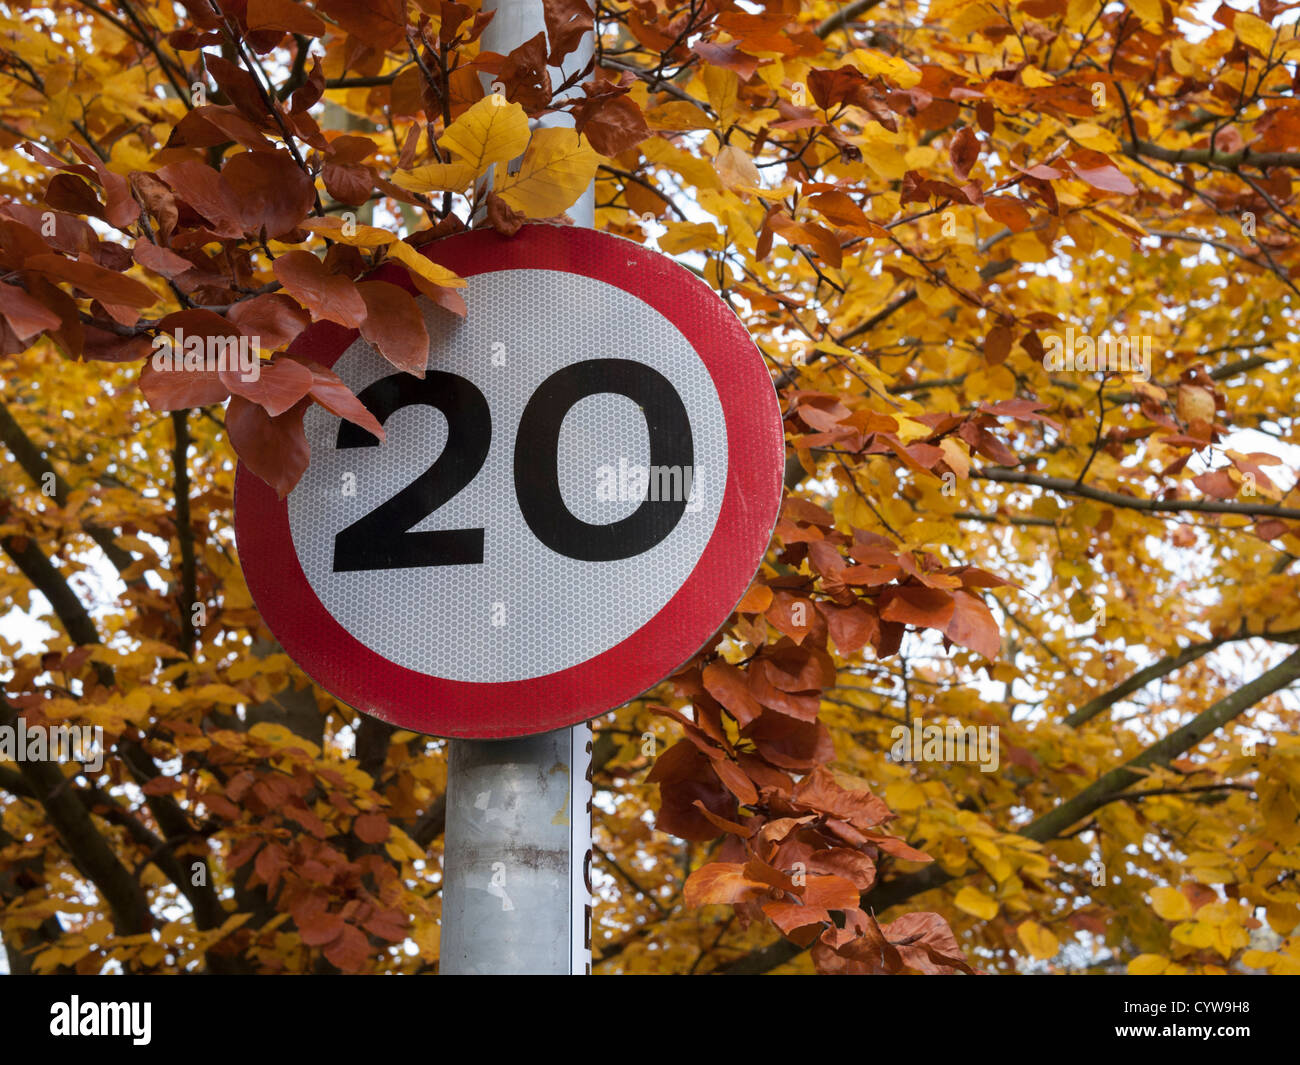 20 mph speed limit signs in Cambridge UK against autumn leaves Stock Photo